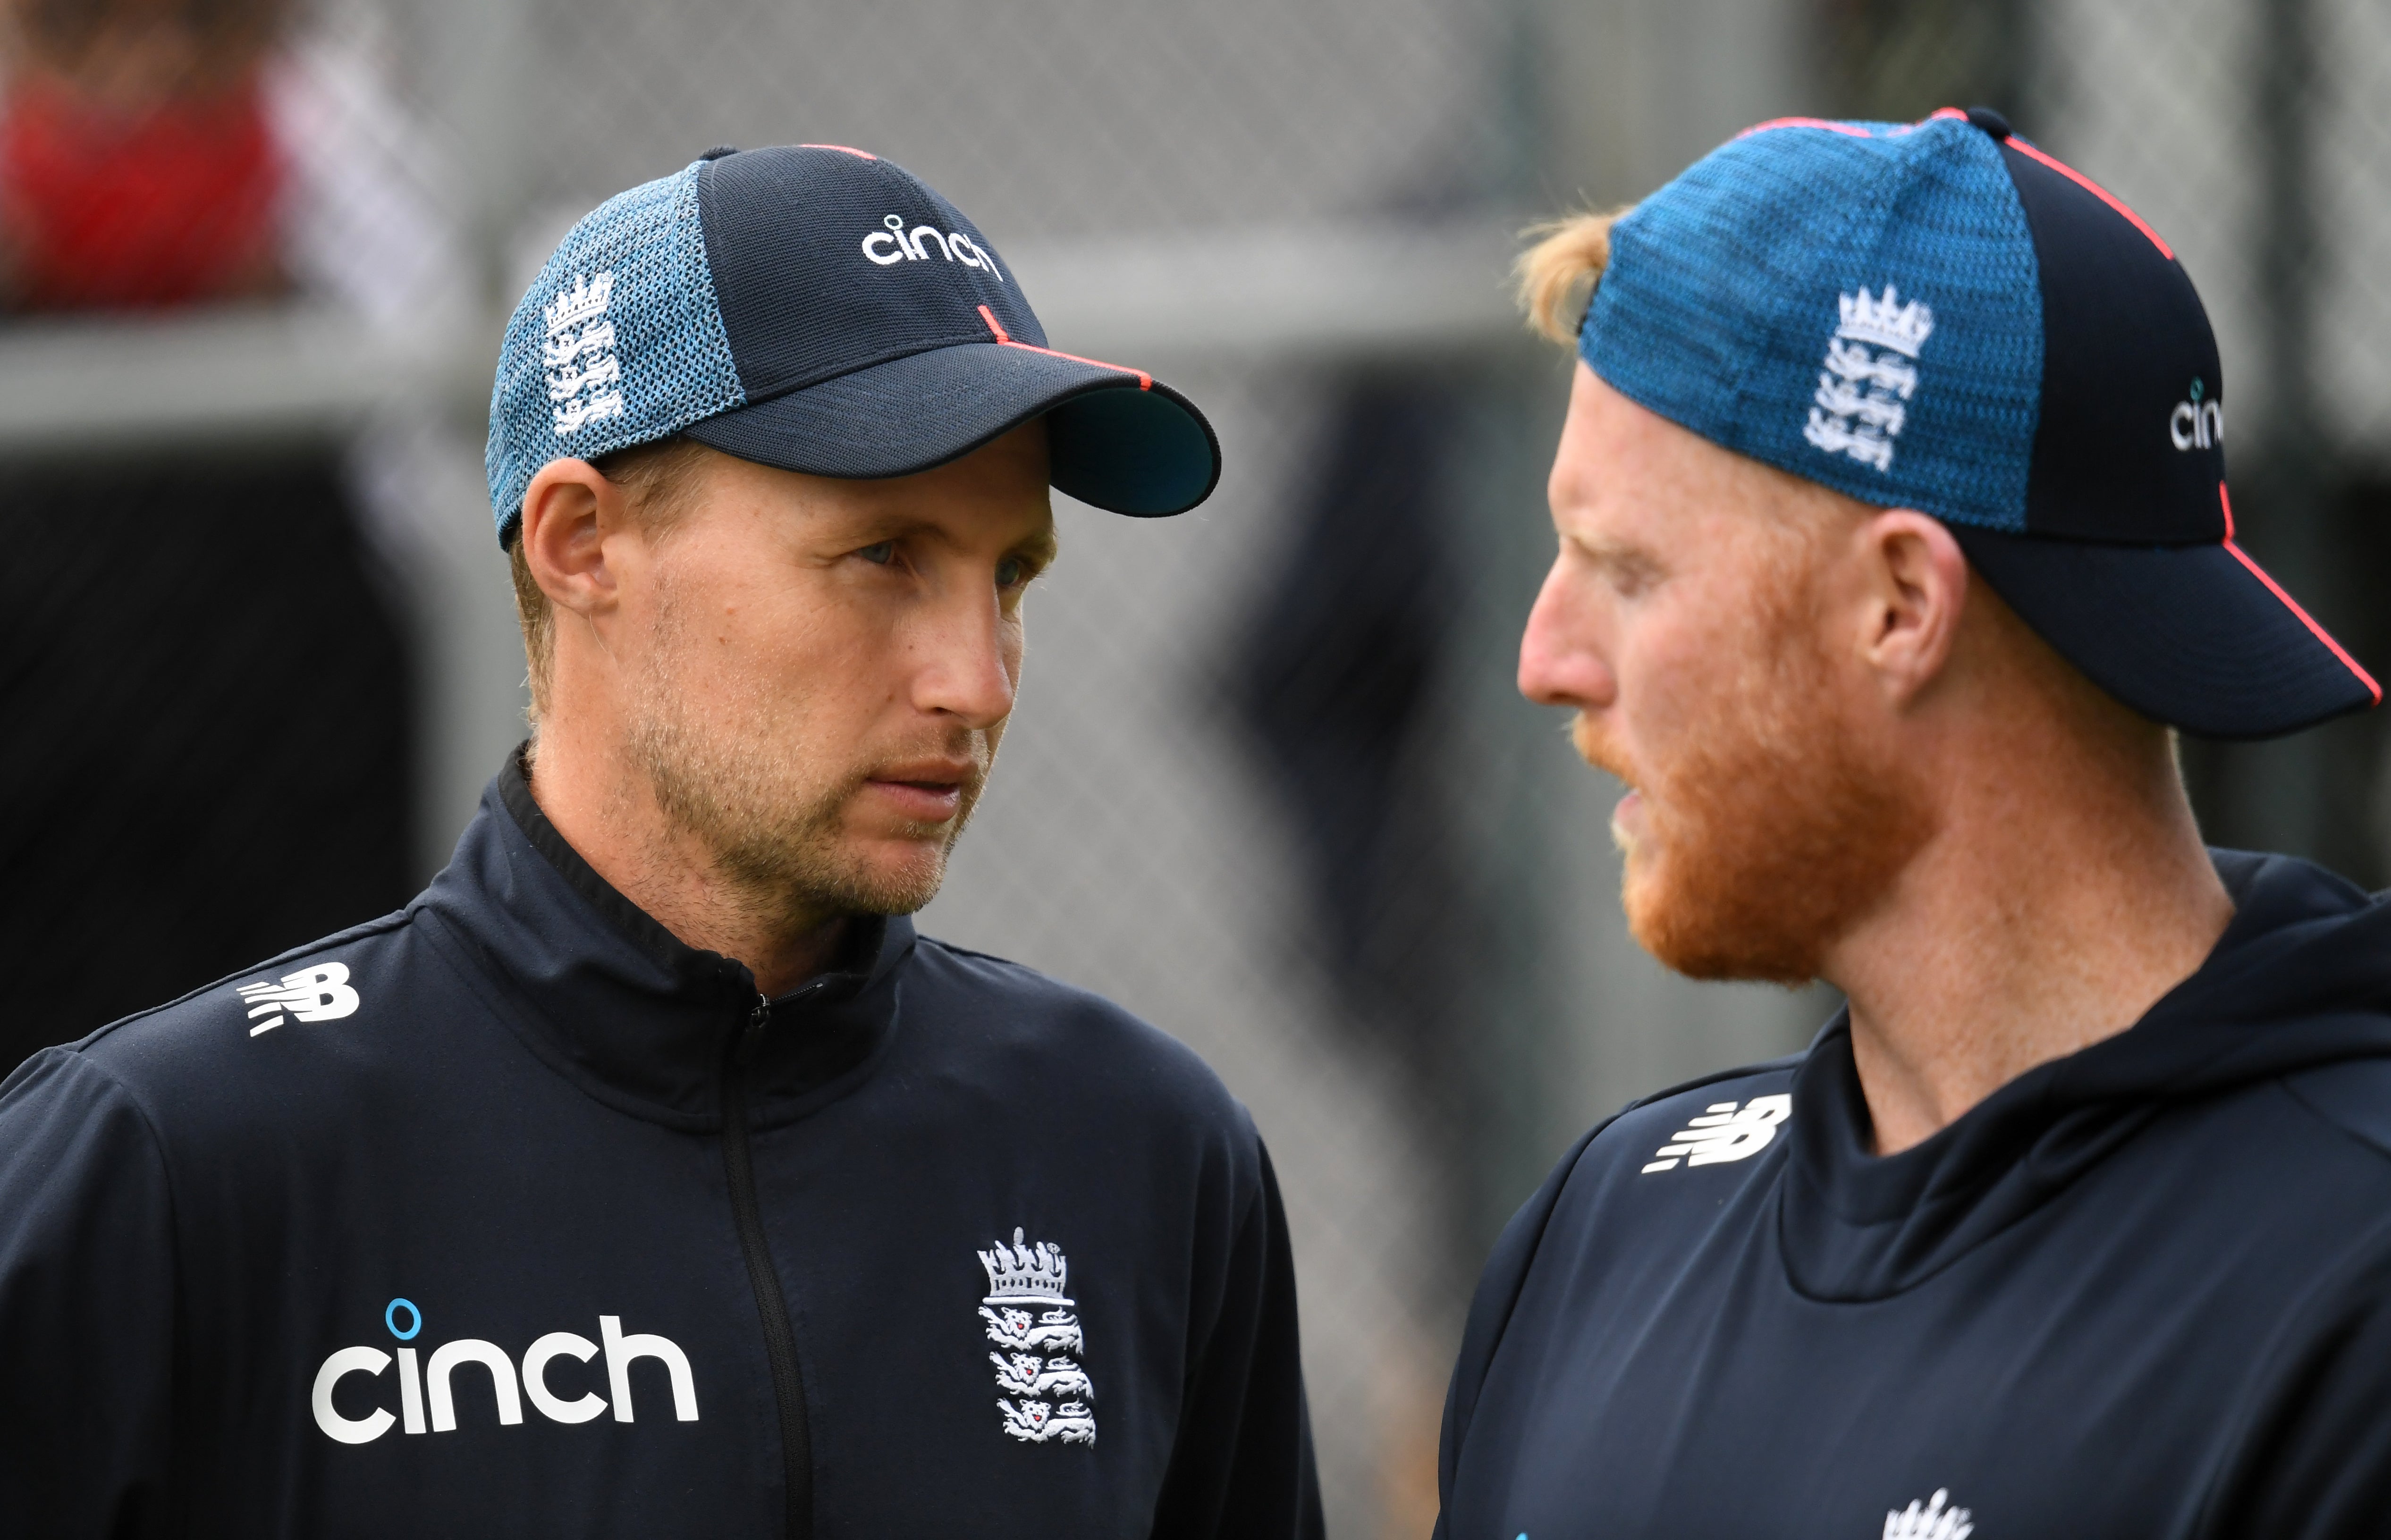 Stokes, right, looks set to replace Joe Root, left, as England captain